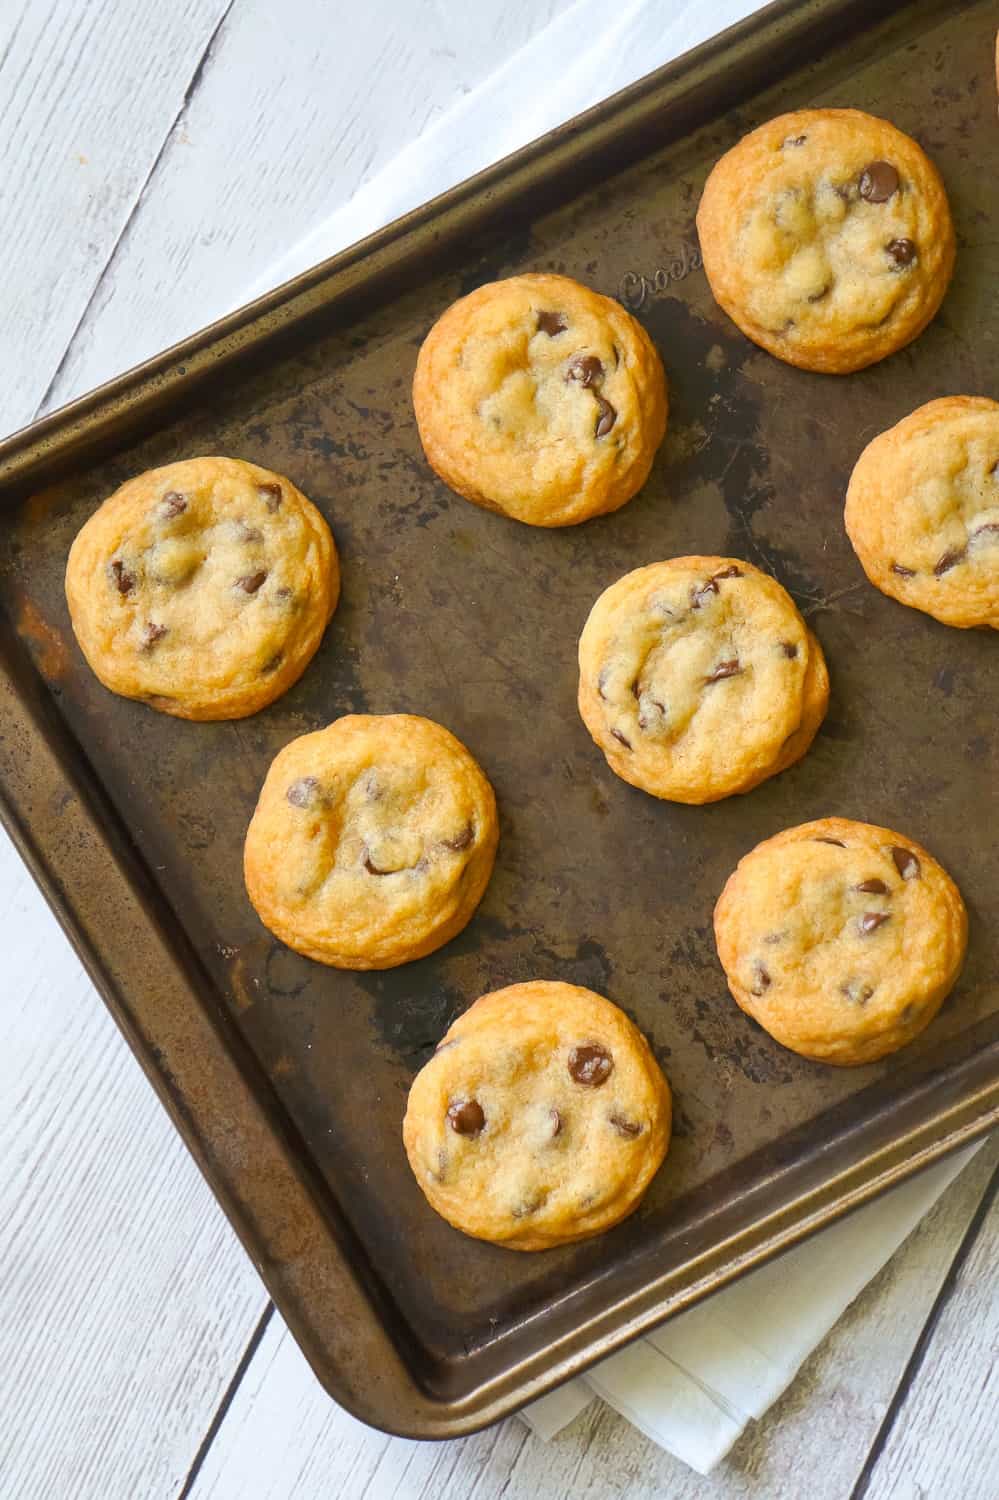 Homemade Chocolate Chips Cookies are a classic dessert everyone loves. These easy chocolate chip cookies from scratch are soft and chewy.